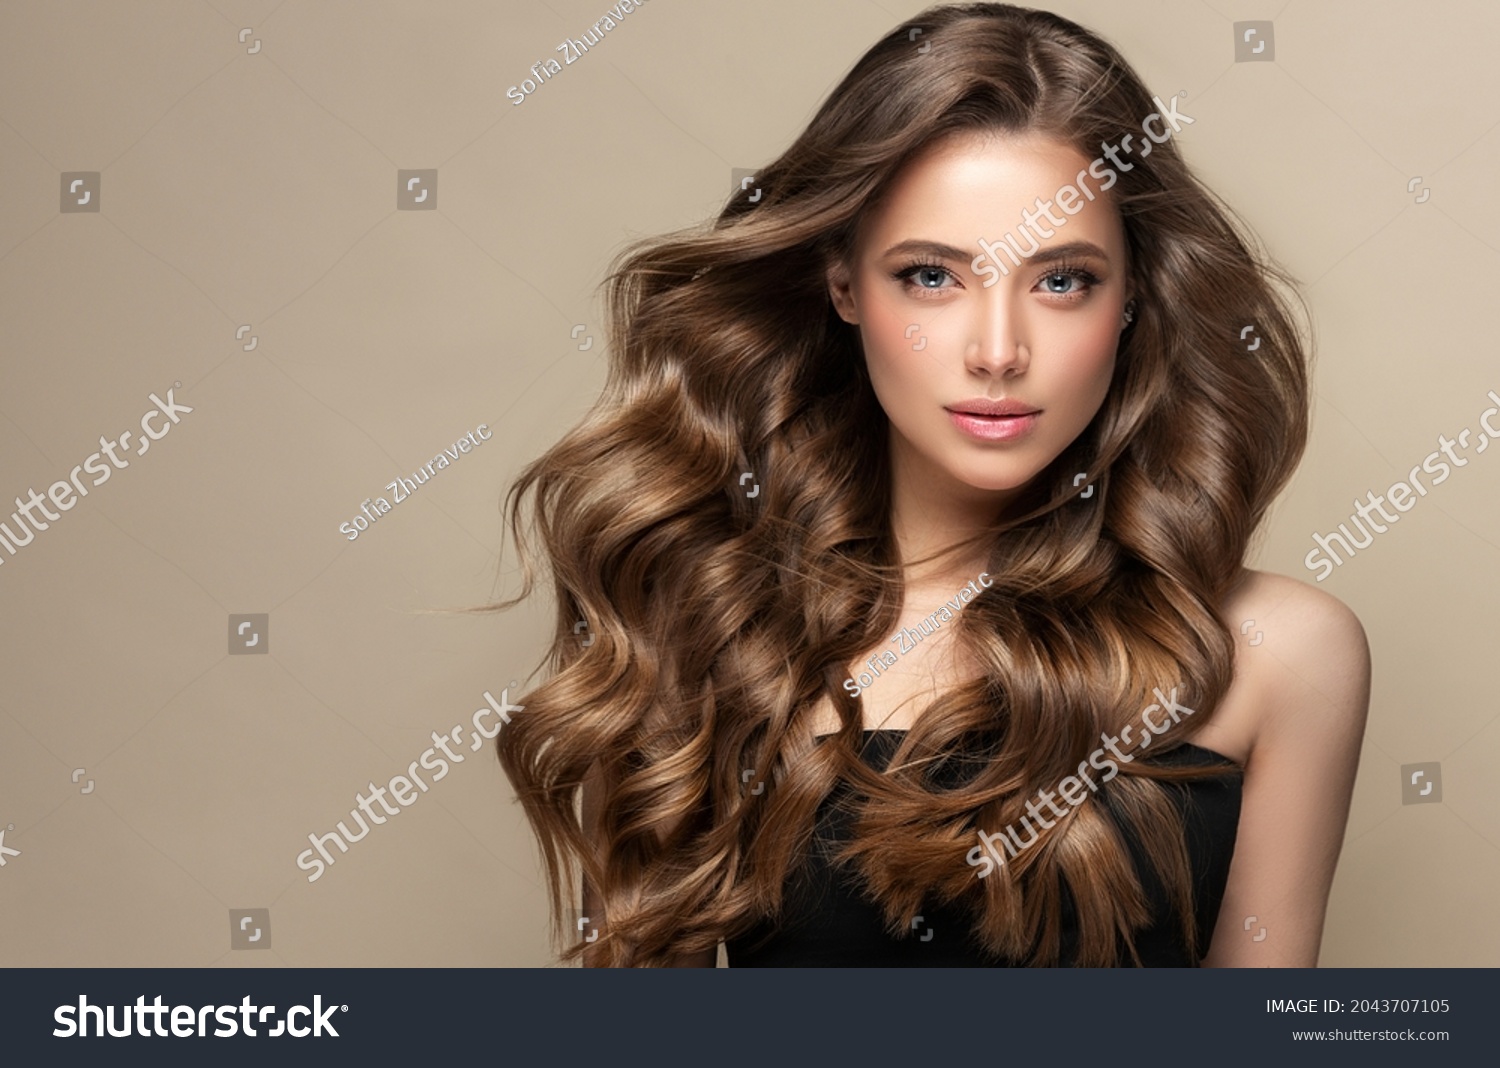 Beautiful laughing brunette model  girl  with long curly  hair . Smiling  woman hairstyle wavy curls .     Fashion , beauty and makeup portrait
 #2043707105